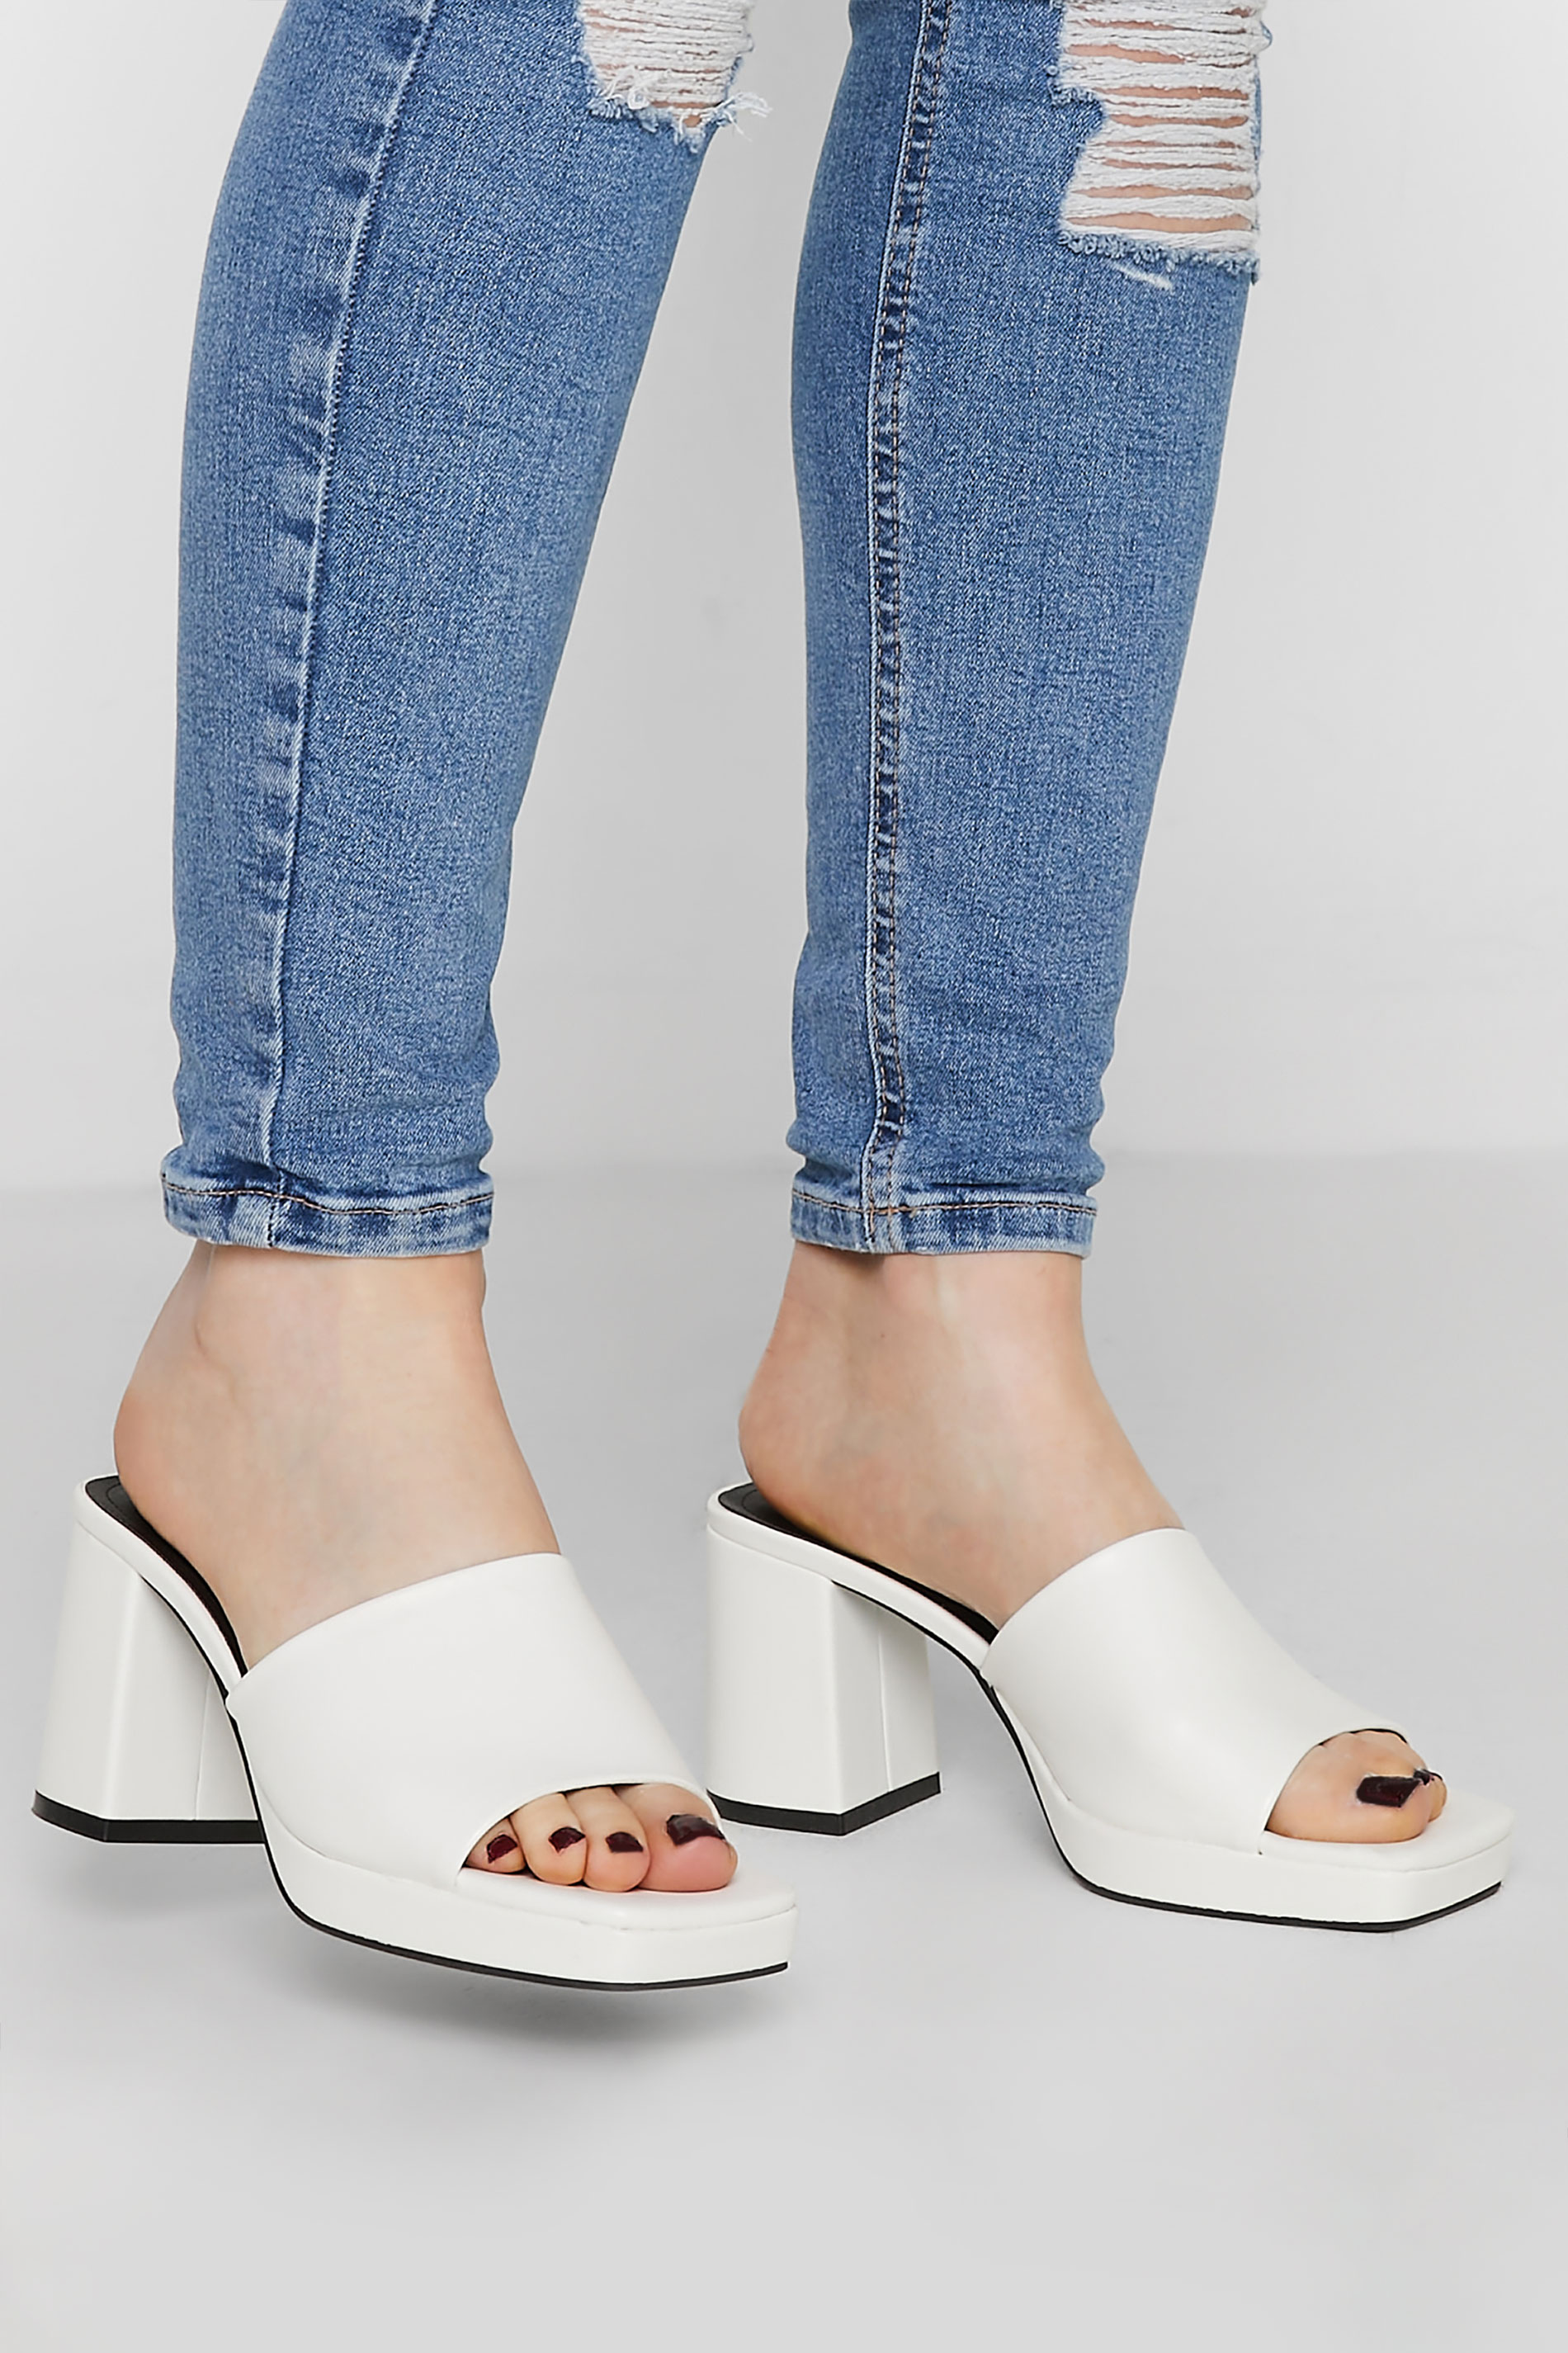 Grande taille  Shoes Grande taille  Heels | PixieGirl White Block Heeled Mules In Standard D Fit - EB16462